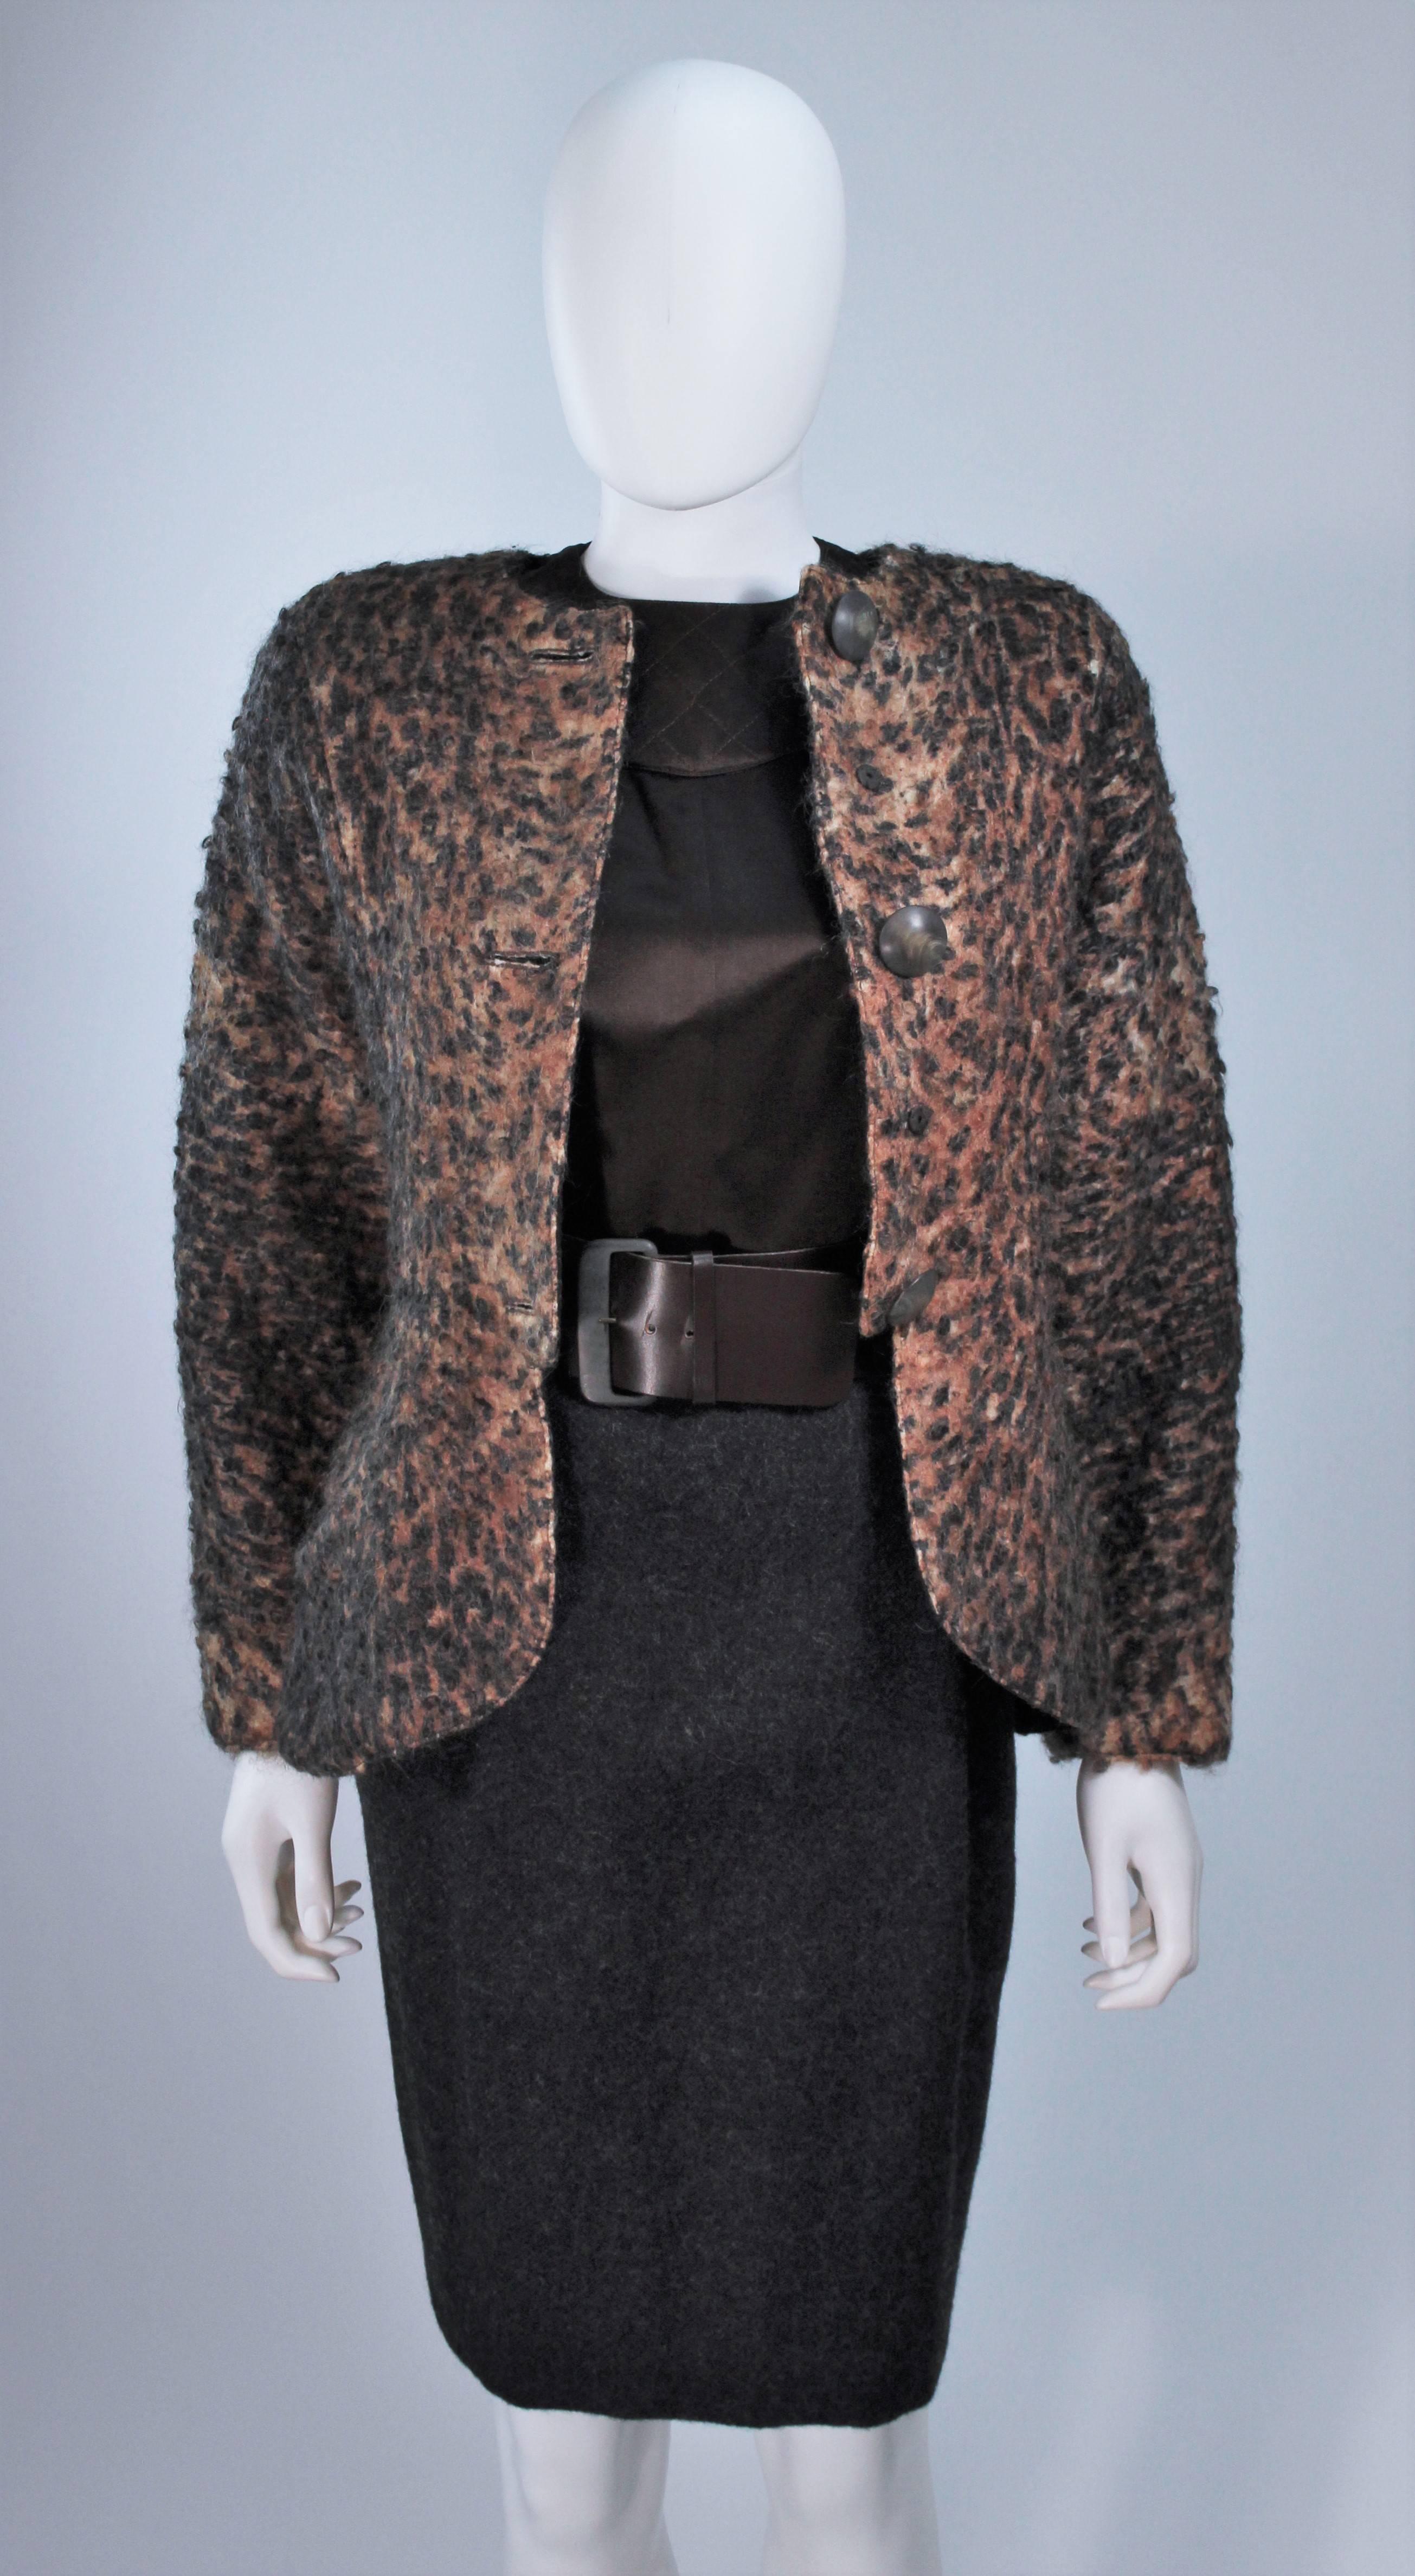 afternoon ensemble comprising coat blouse and skirt in wool mohair boucle